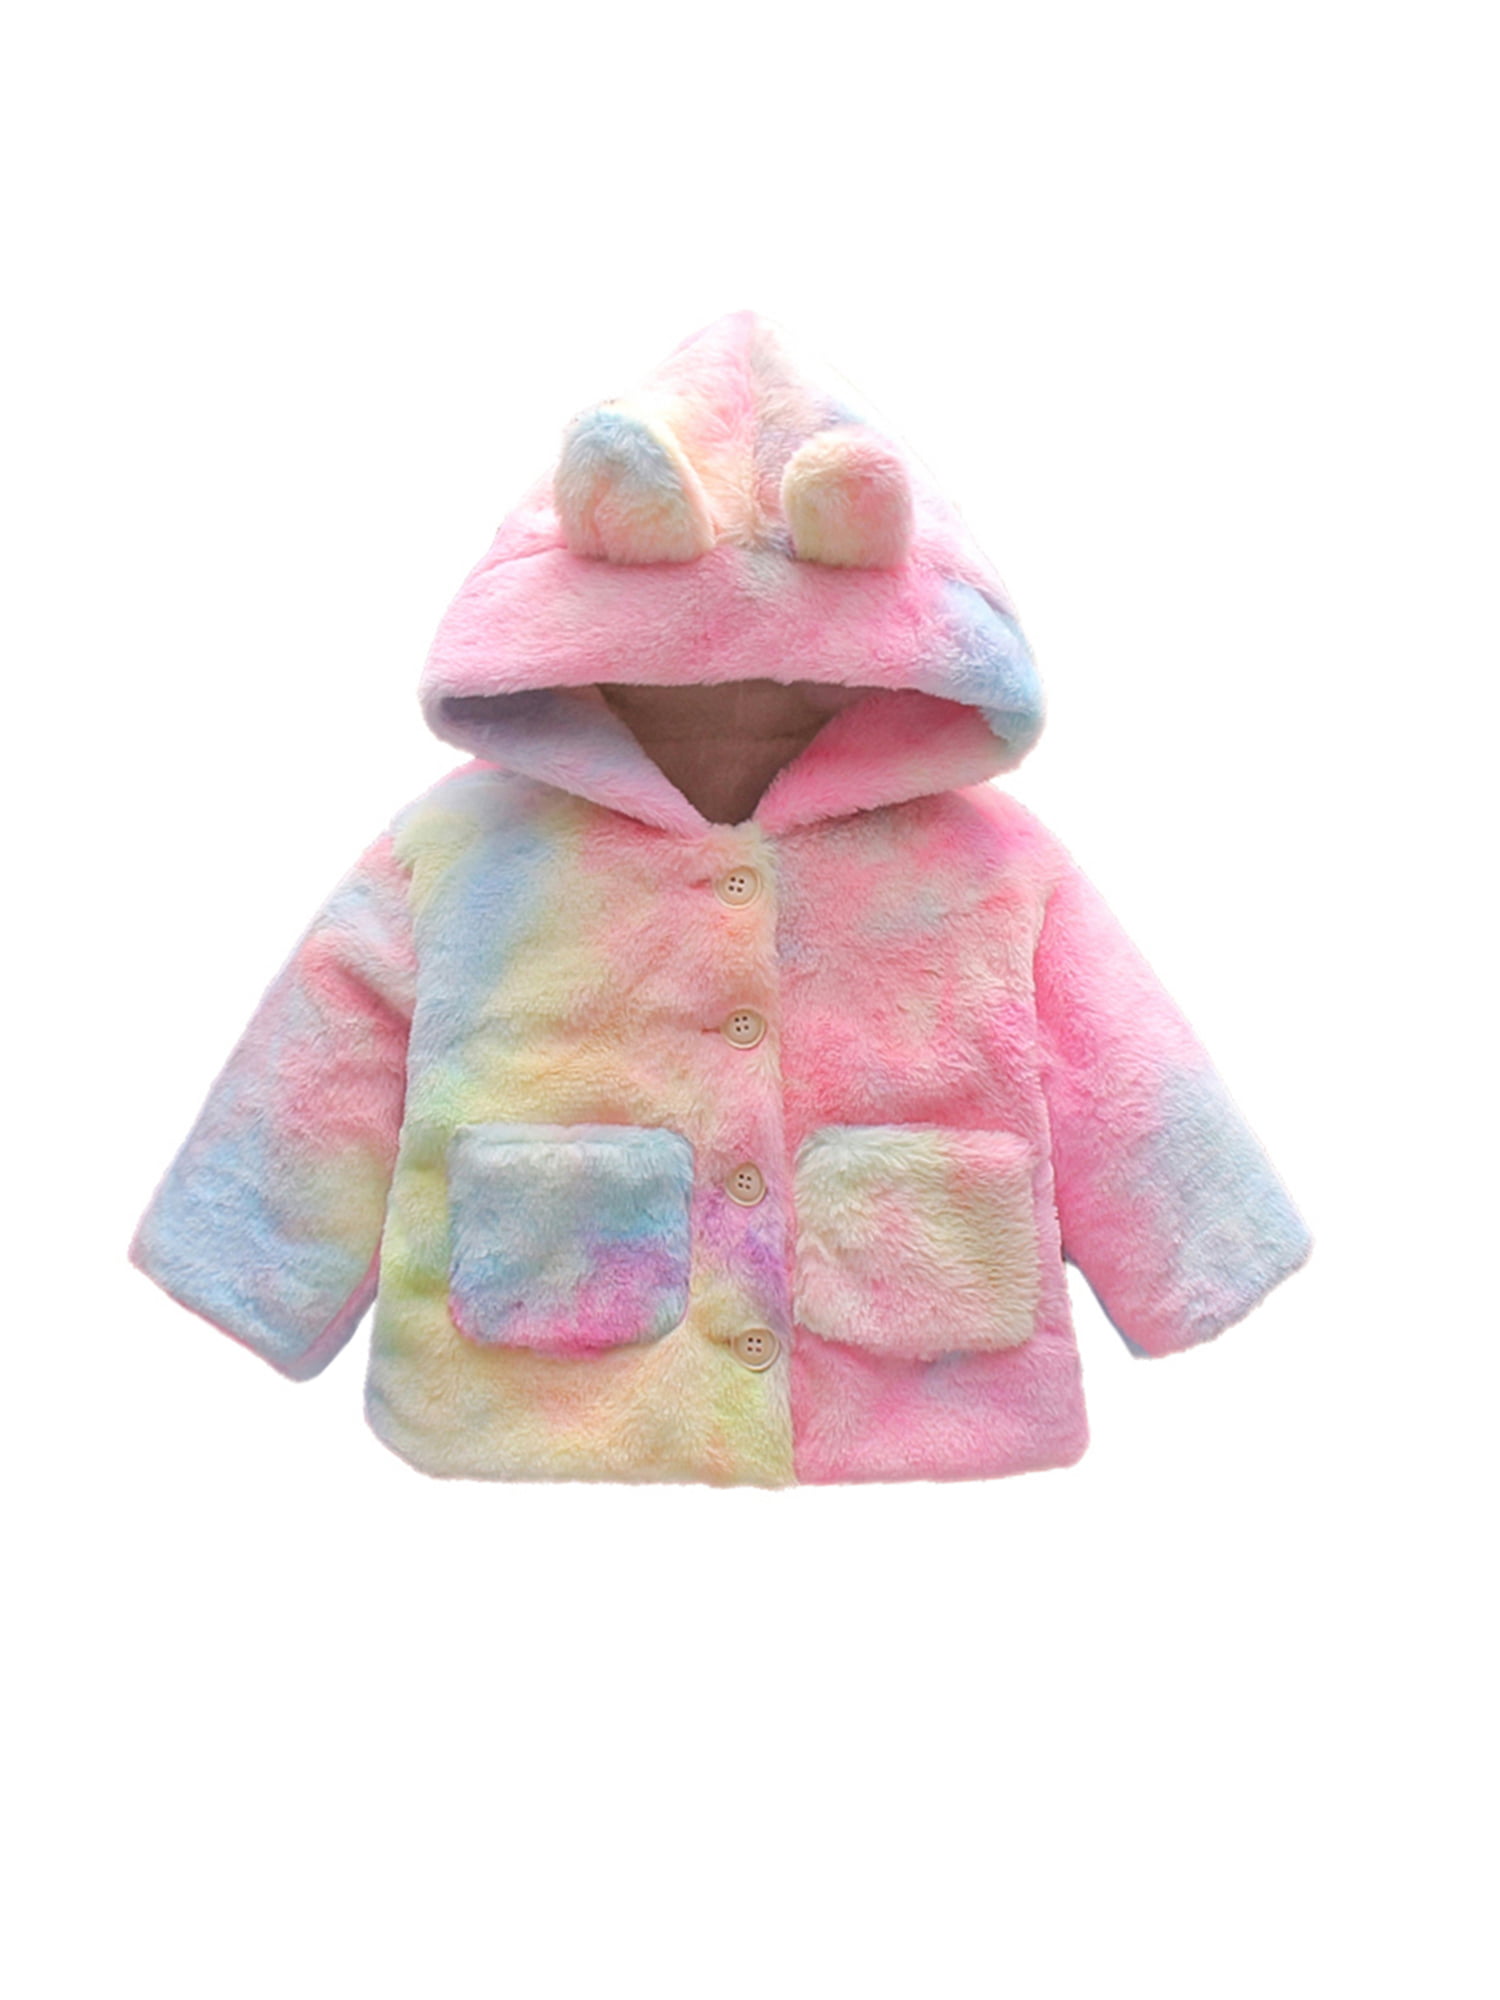 Details about   NEW Baby Girls Winter Warm Bow Hooded Coat Zipper Thicken Jacket Outerwear 